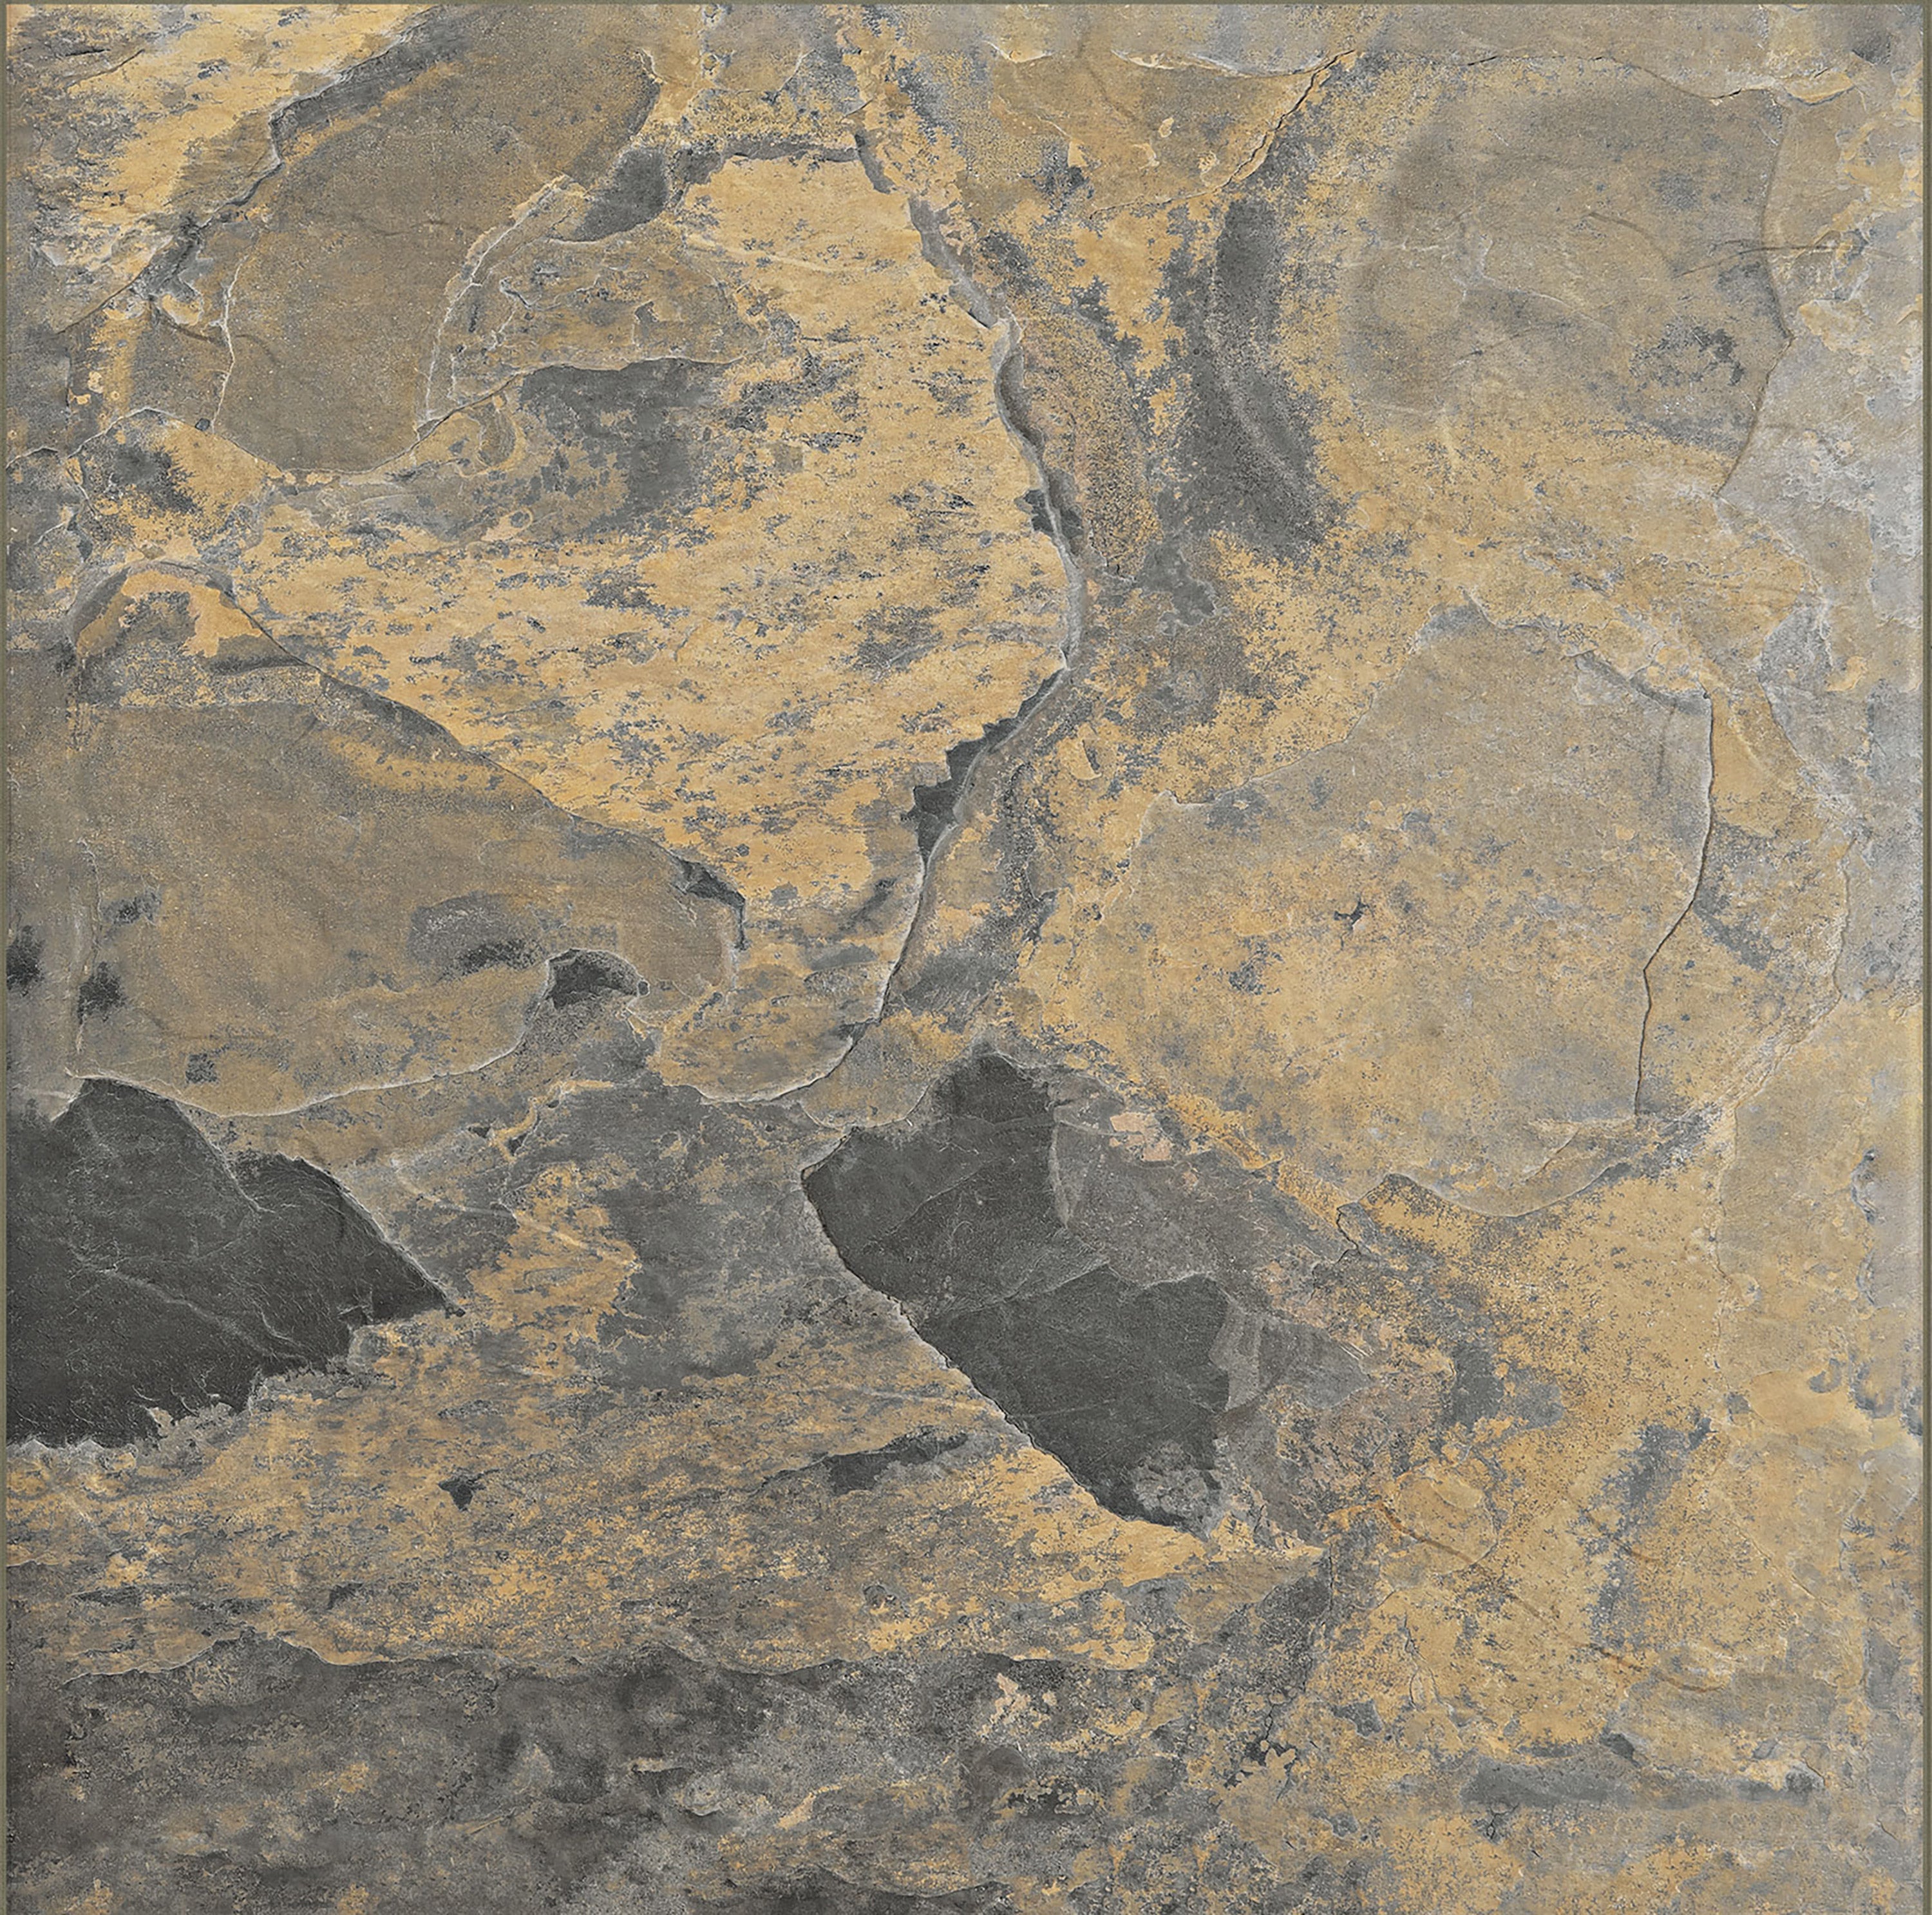 landmark frontier20 slate rustic gold paver tile 12x12x20mm matte rectified porcelain tile distributed by surface group international